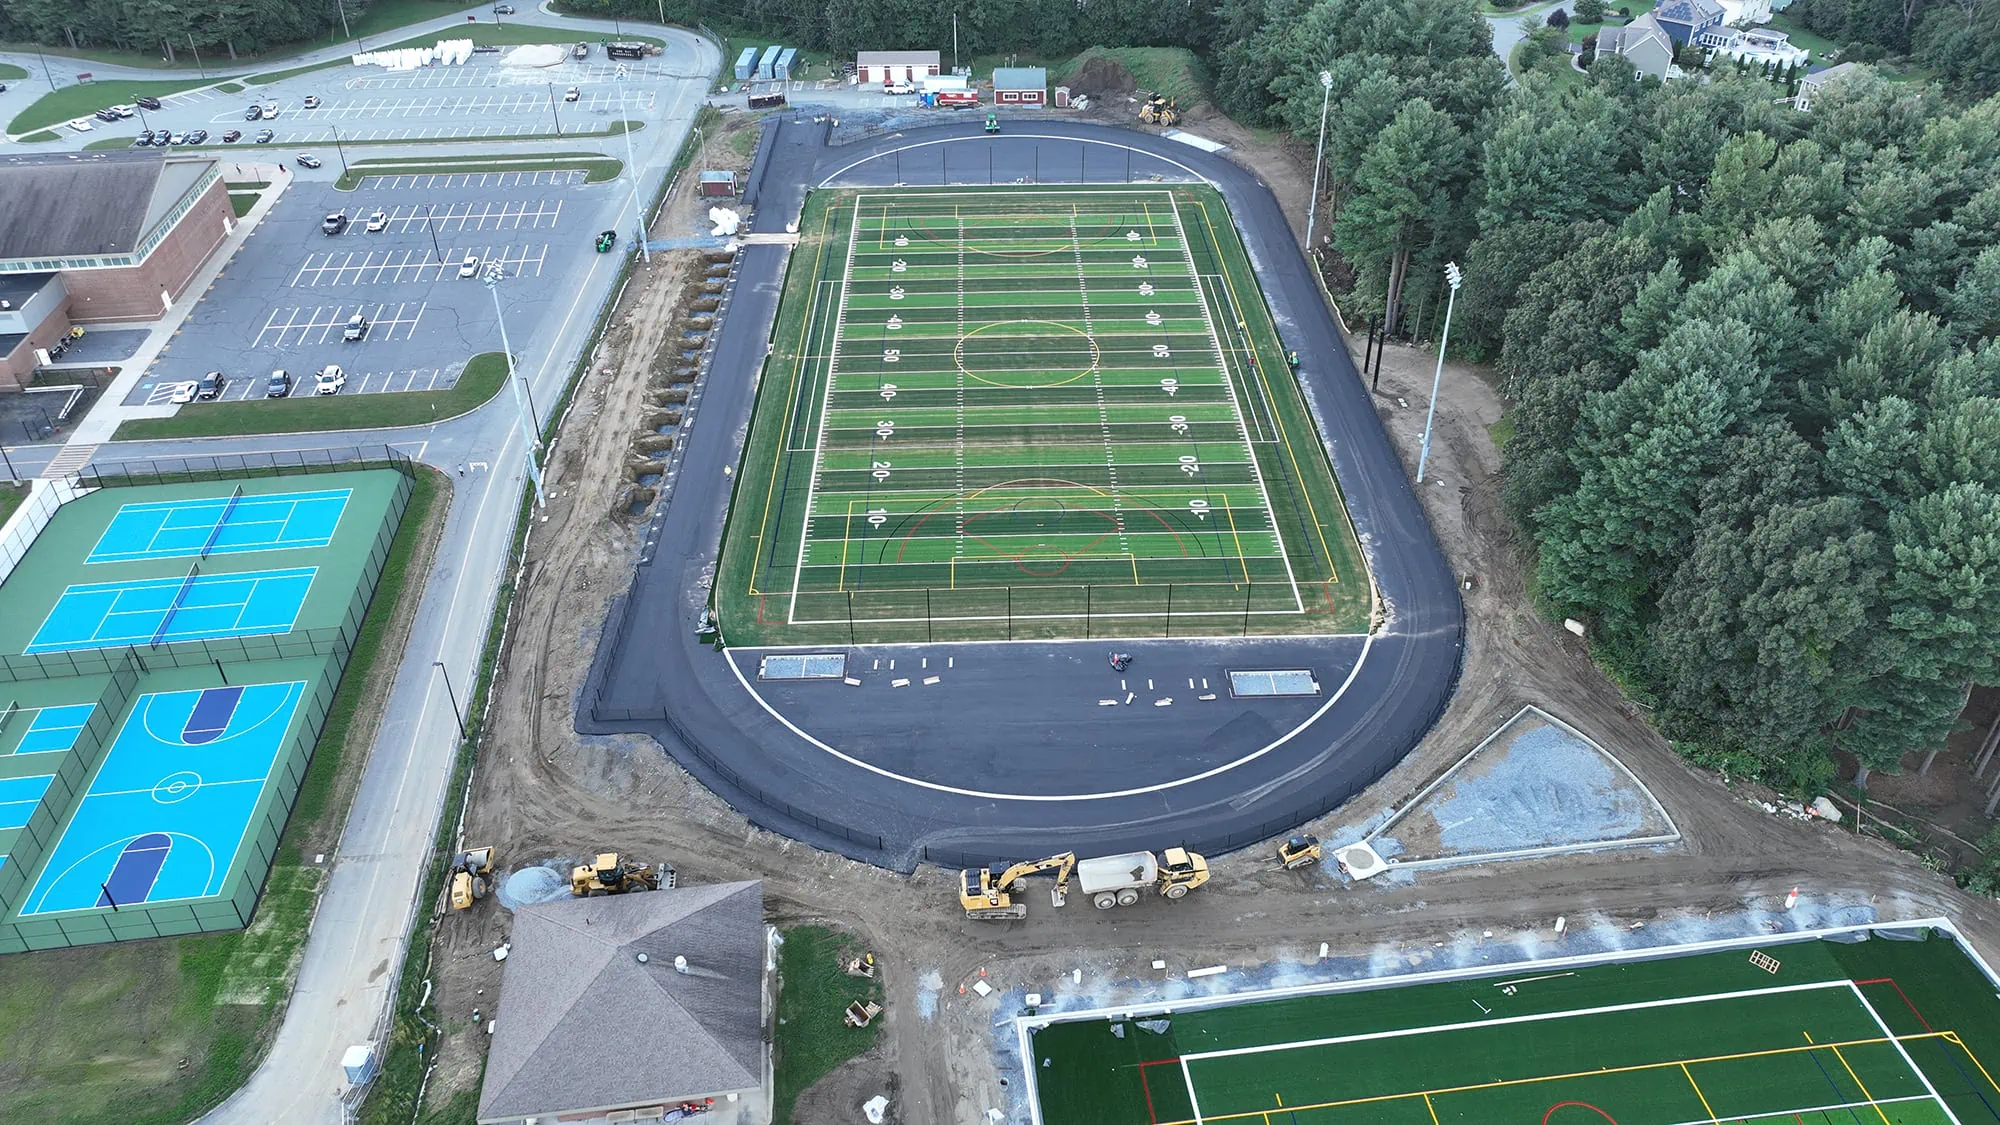 Work continues on ‘Gonkplex’ at ARHS